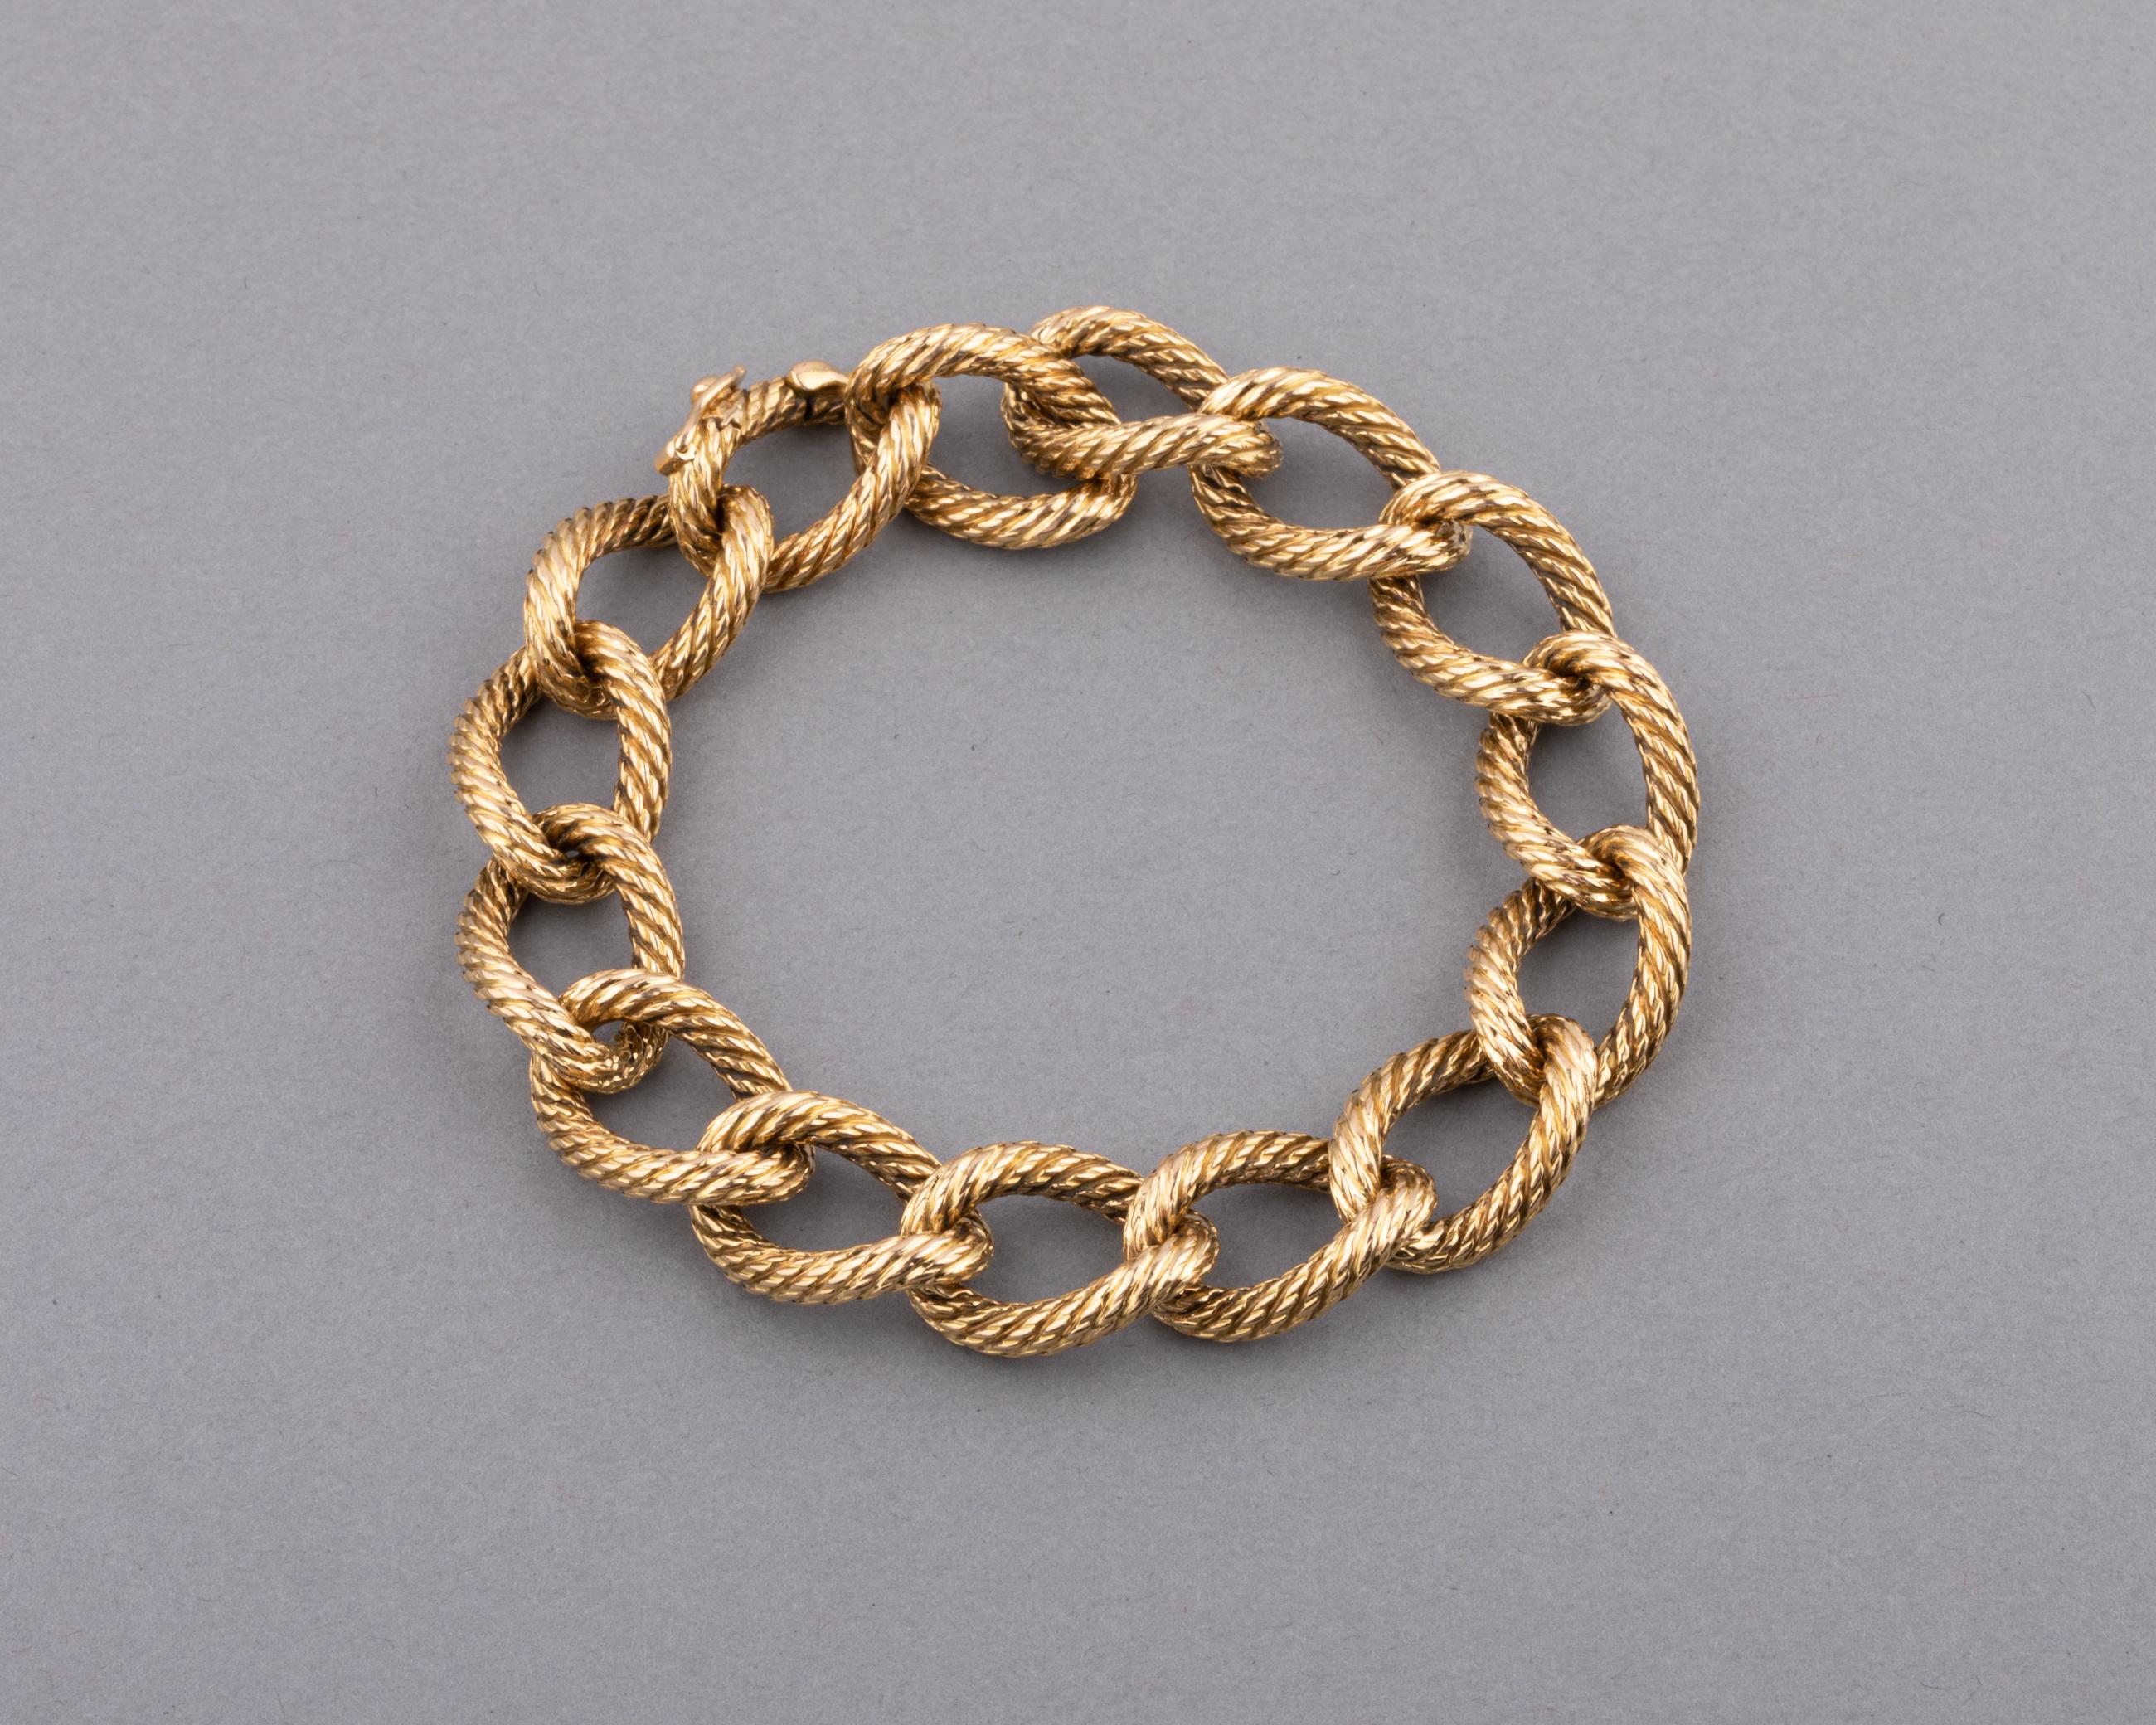  A very charming French vintage bracelet, made circa 1960.
Made in yellow gold 18k: French hallmark (eagle head).
Dimensions: 18 cm and 12 mm width.
Total weight: 57.30 grams